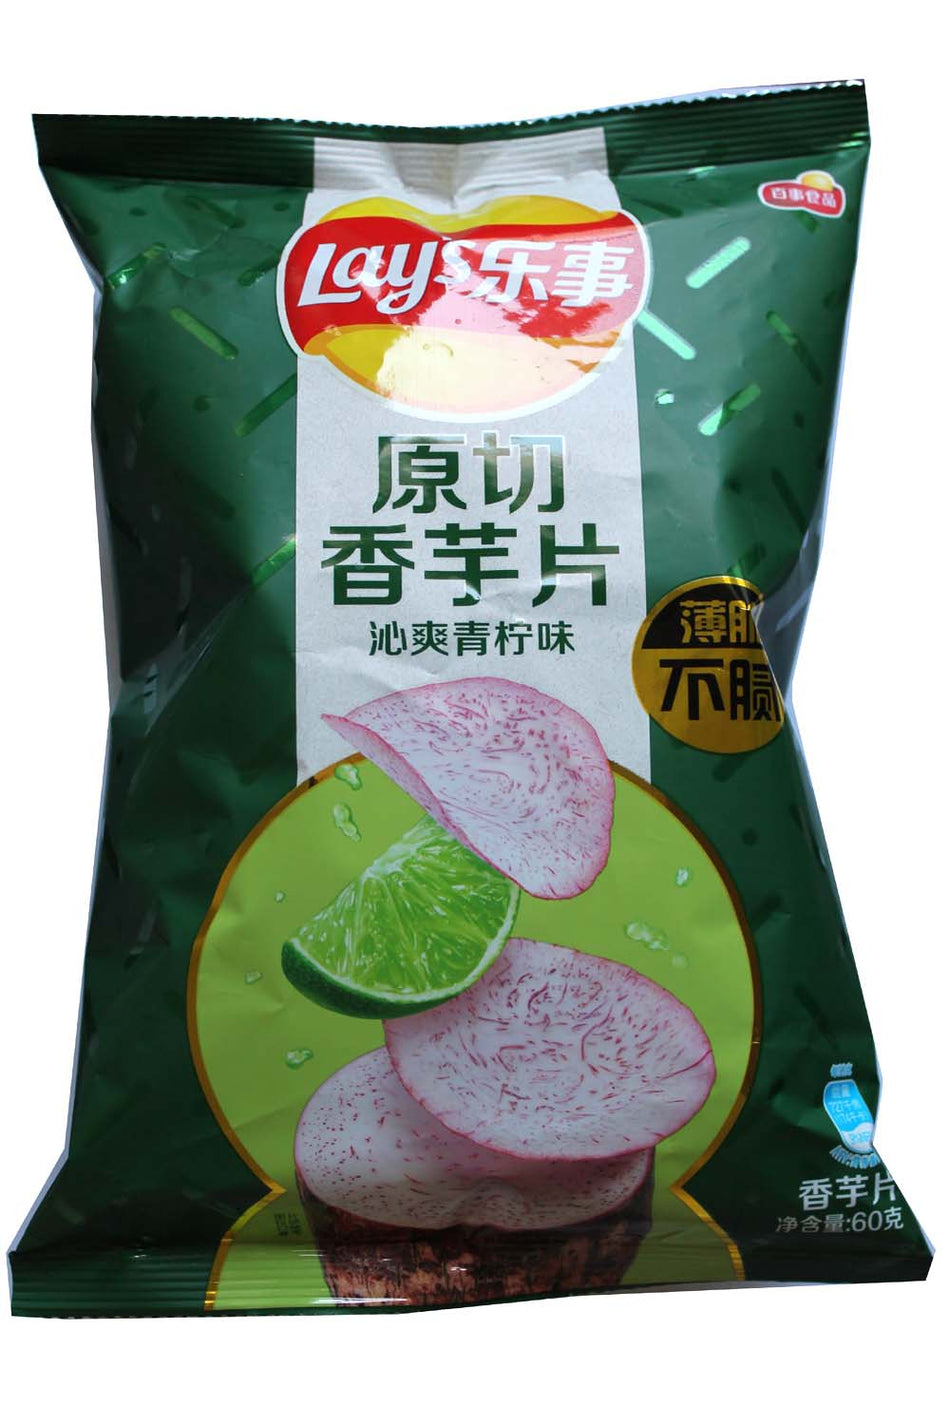 Lay's  Lime flavor chip